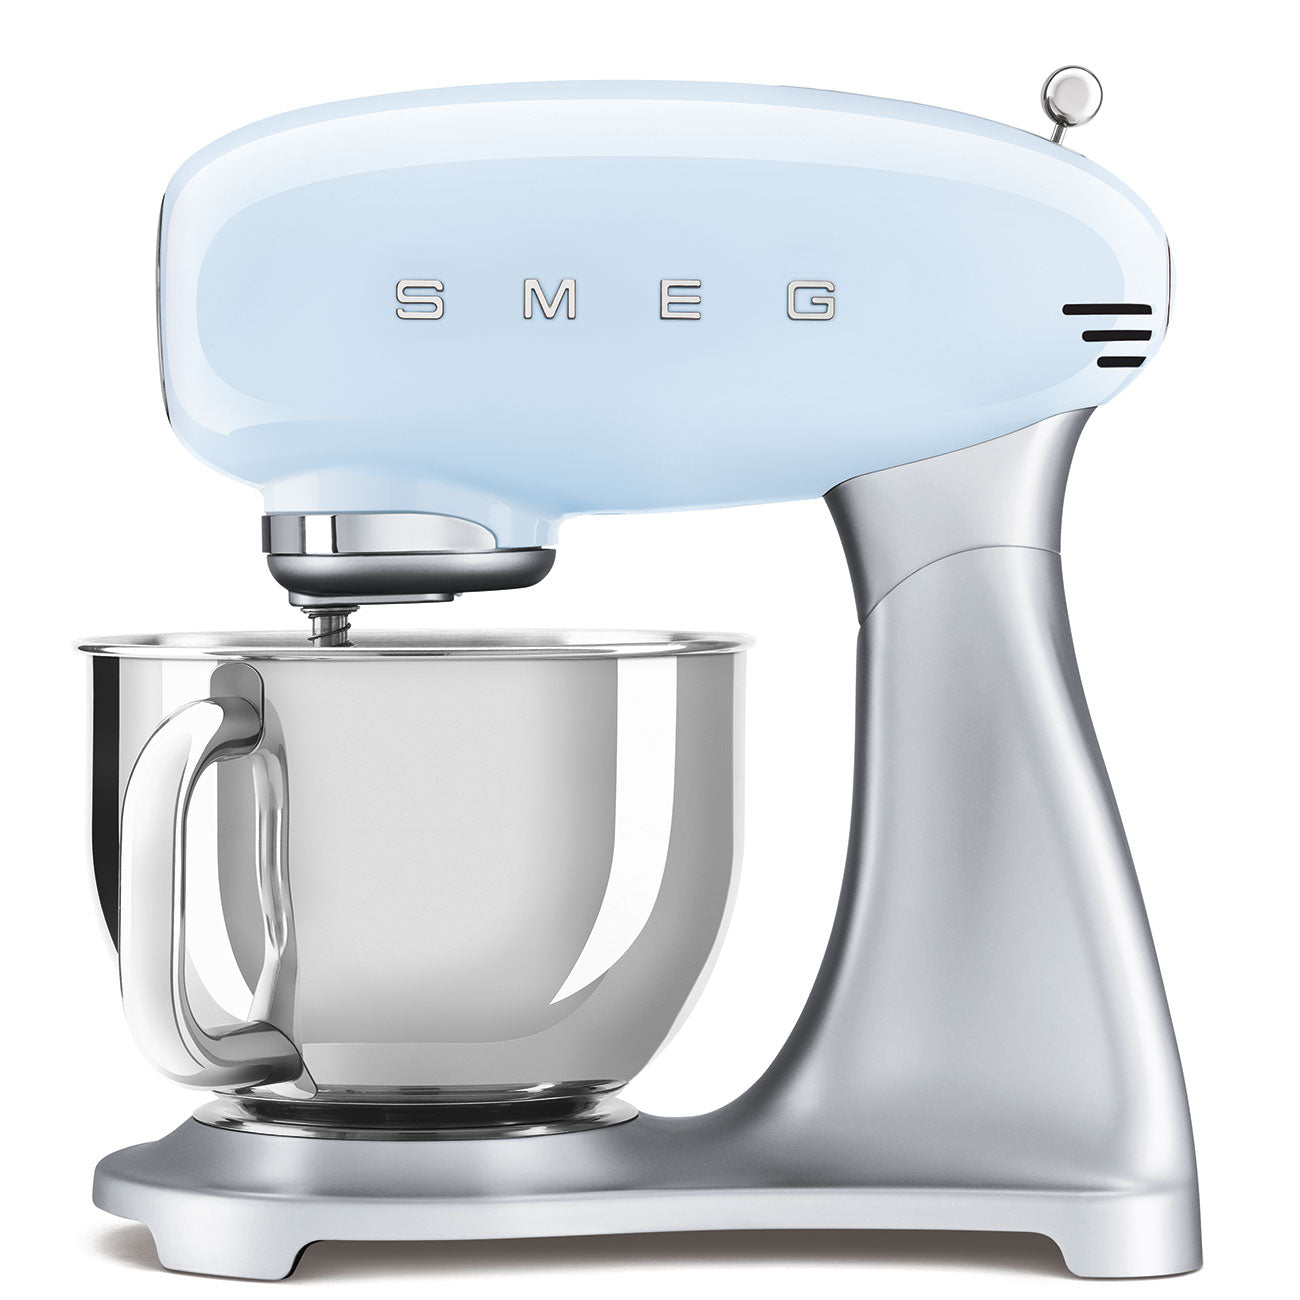 Smeg SMF02 Stand Mixer 50s Retro Style - Pastel Blue from MagicVision